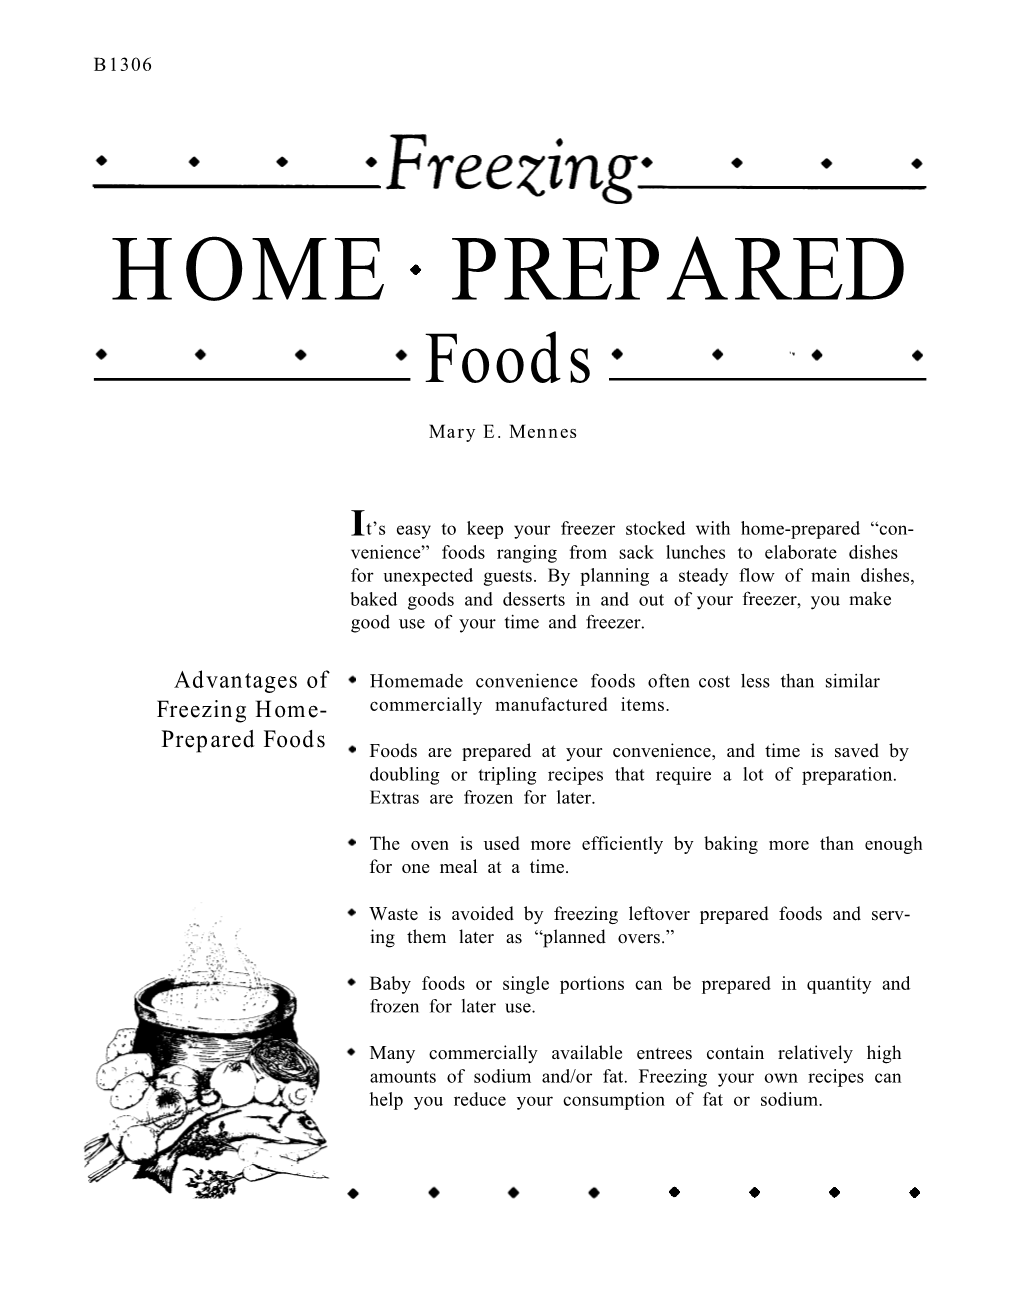 Freezing Home-Prepared Foods RP-4-93-3M-100-S